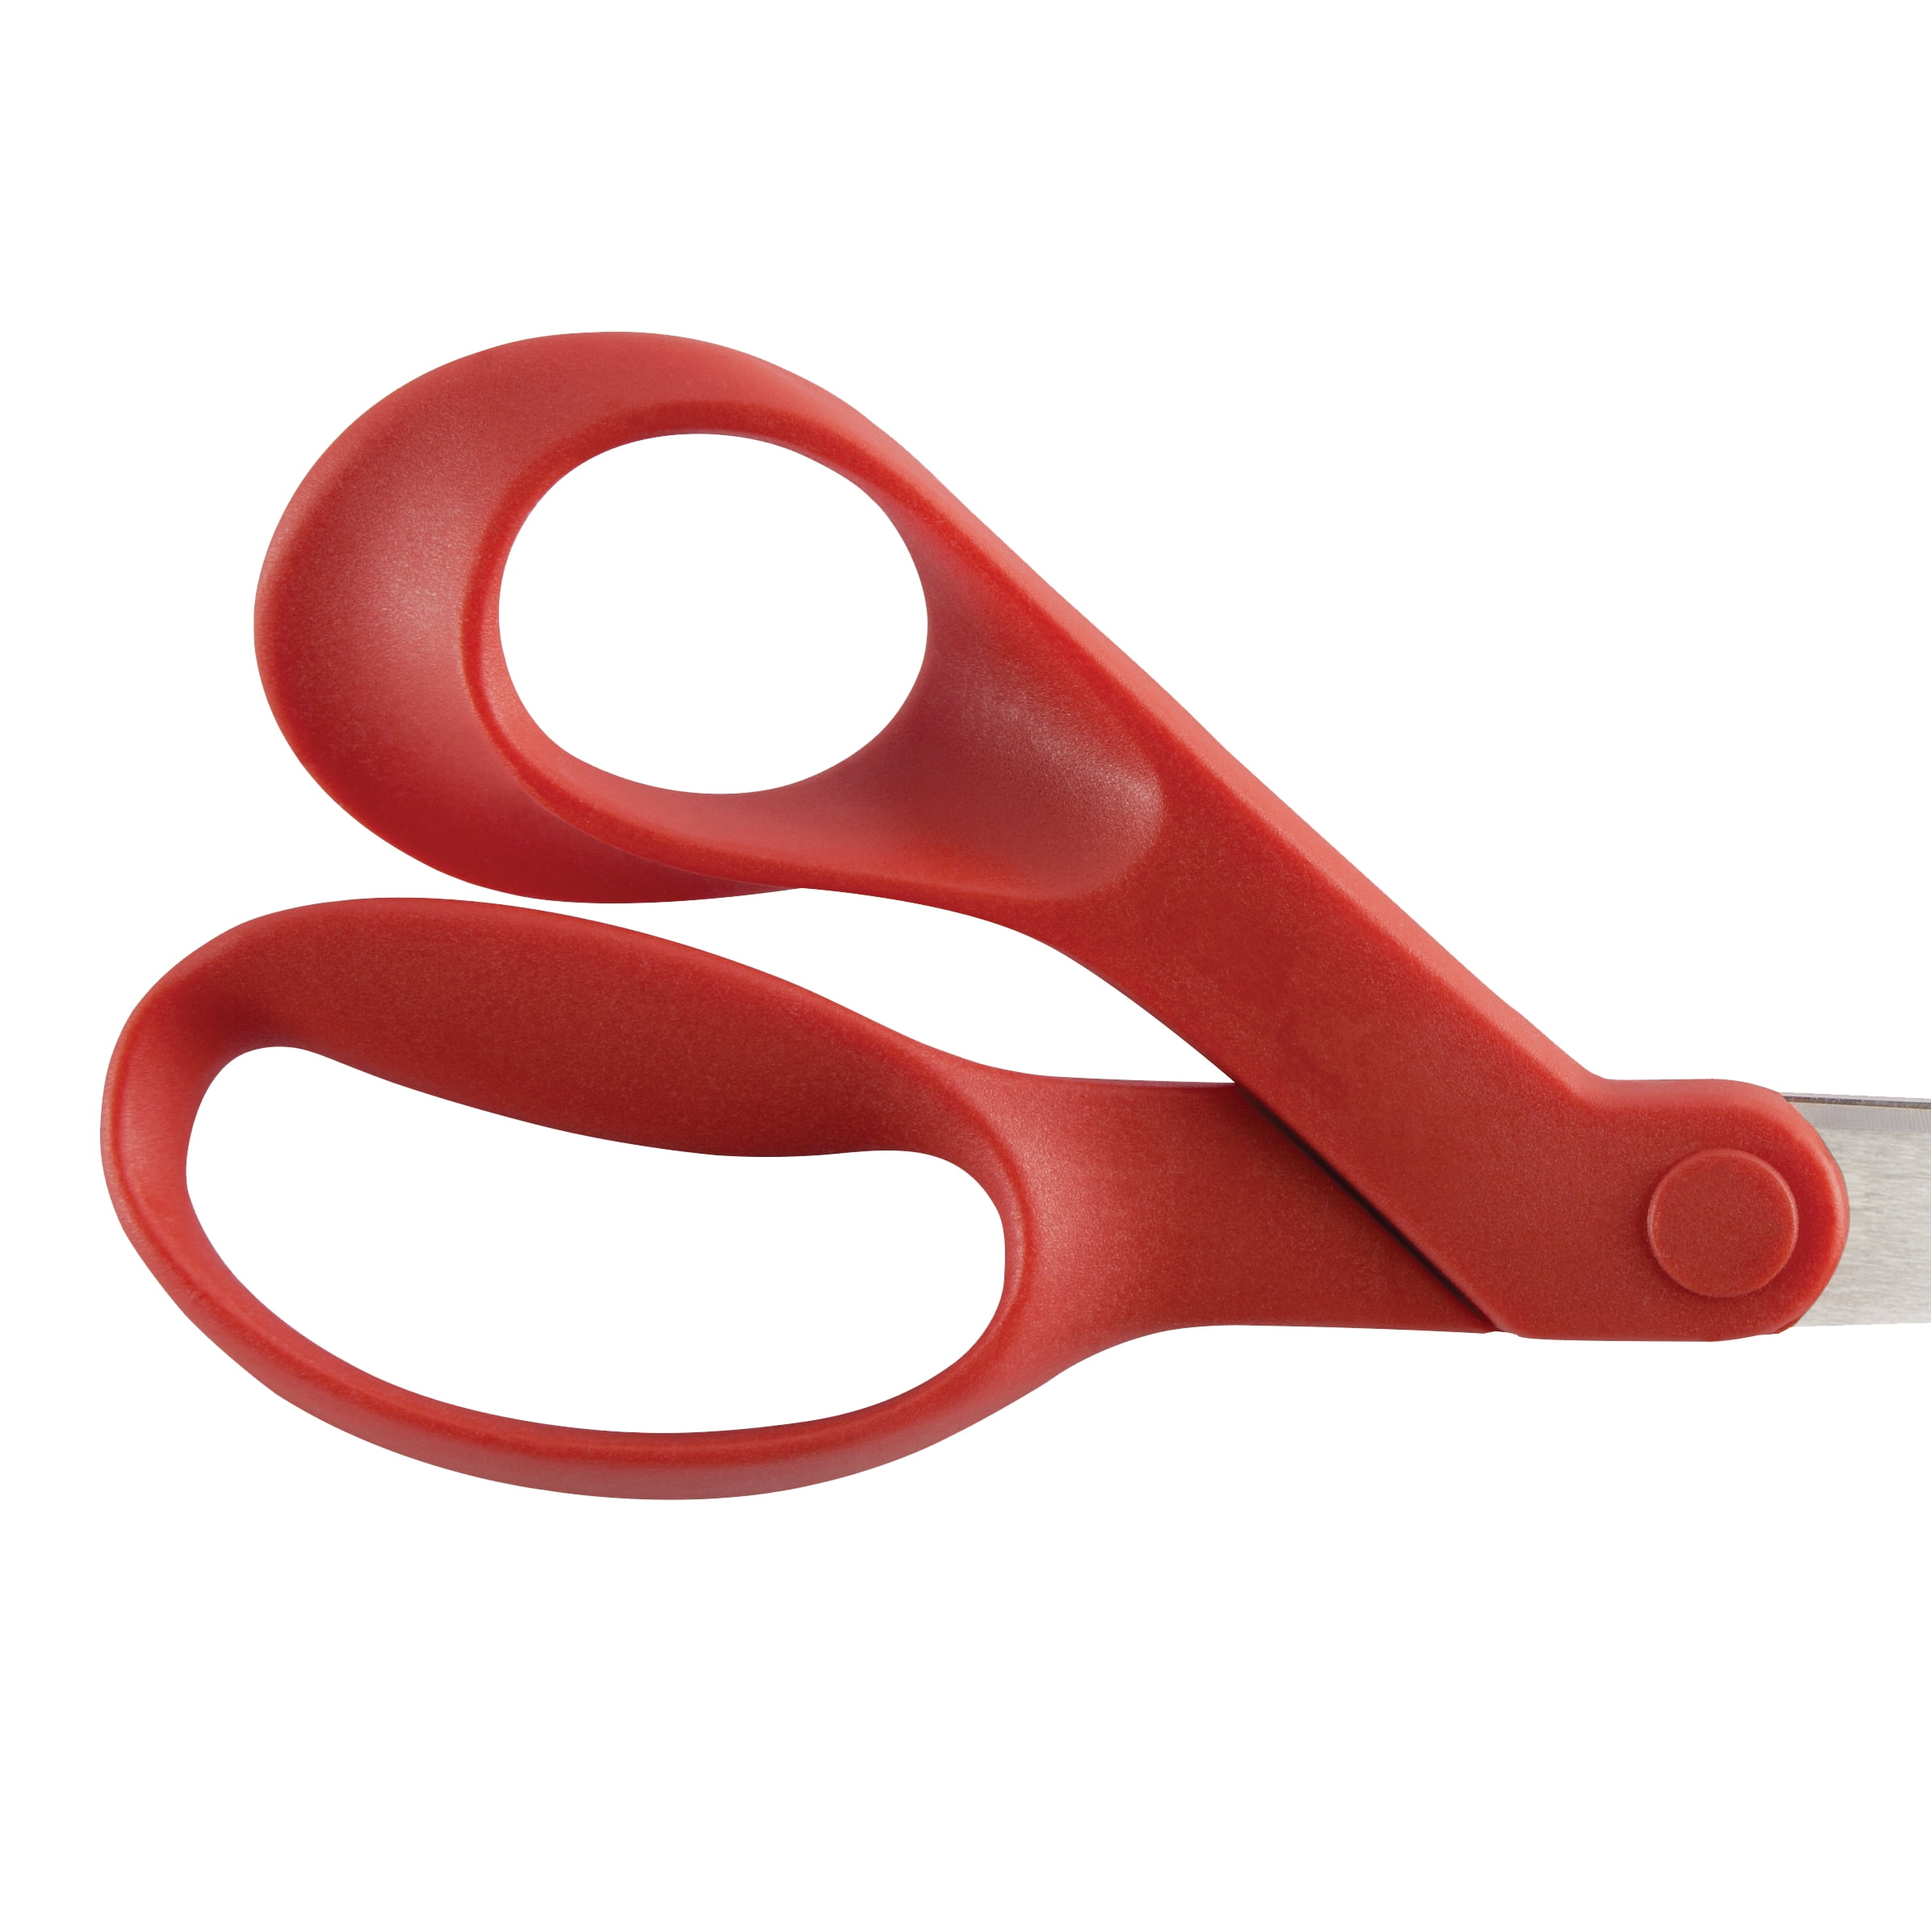 Fiskars All-Purpose Left-Handed Scissors - Ergonomically Contoured - 8  Stainless Steel - Paper and Fabric Scissors for Office, Arts, and Crafts -  Red